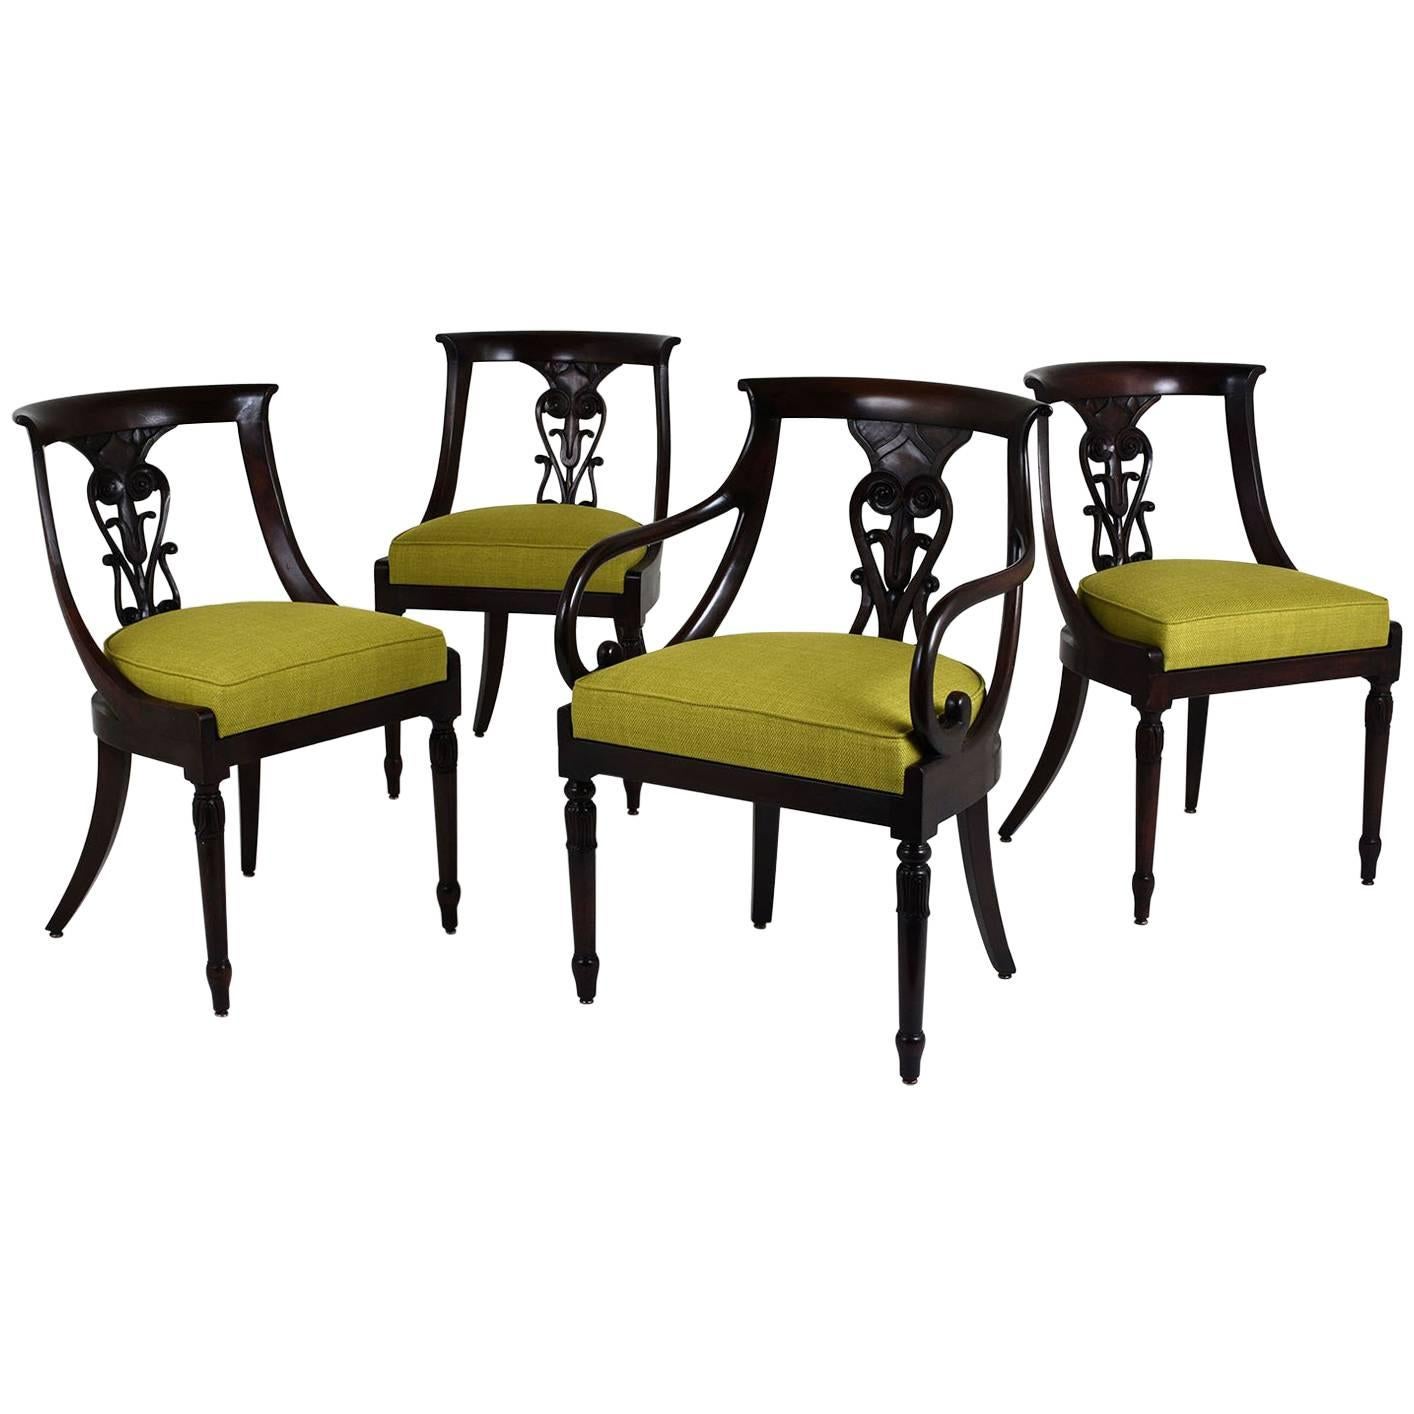 Set of Four Hollywood Regency Chairs